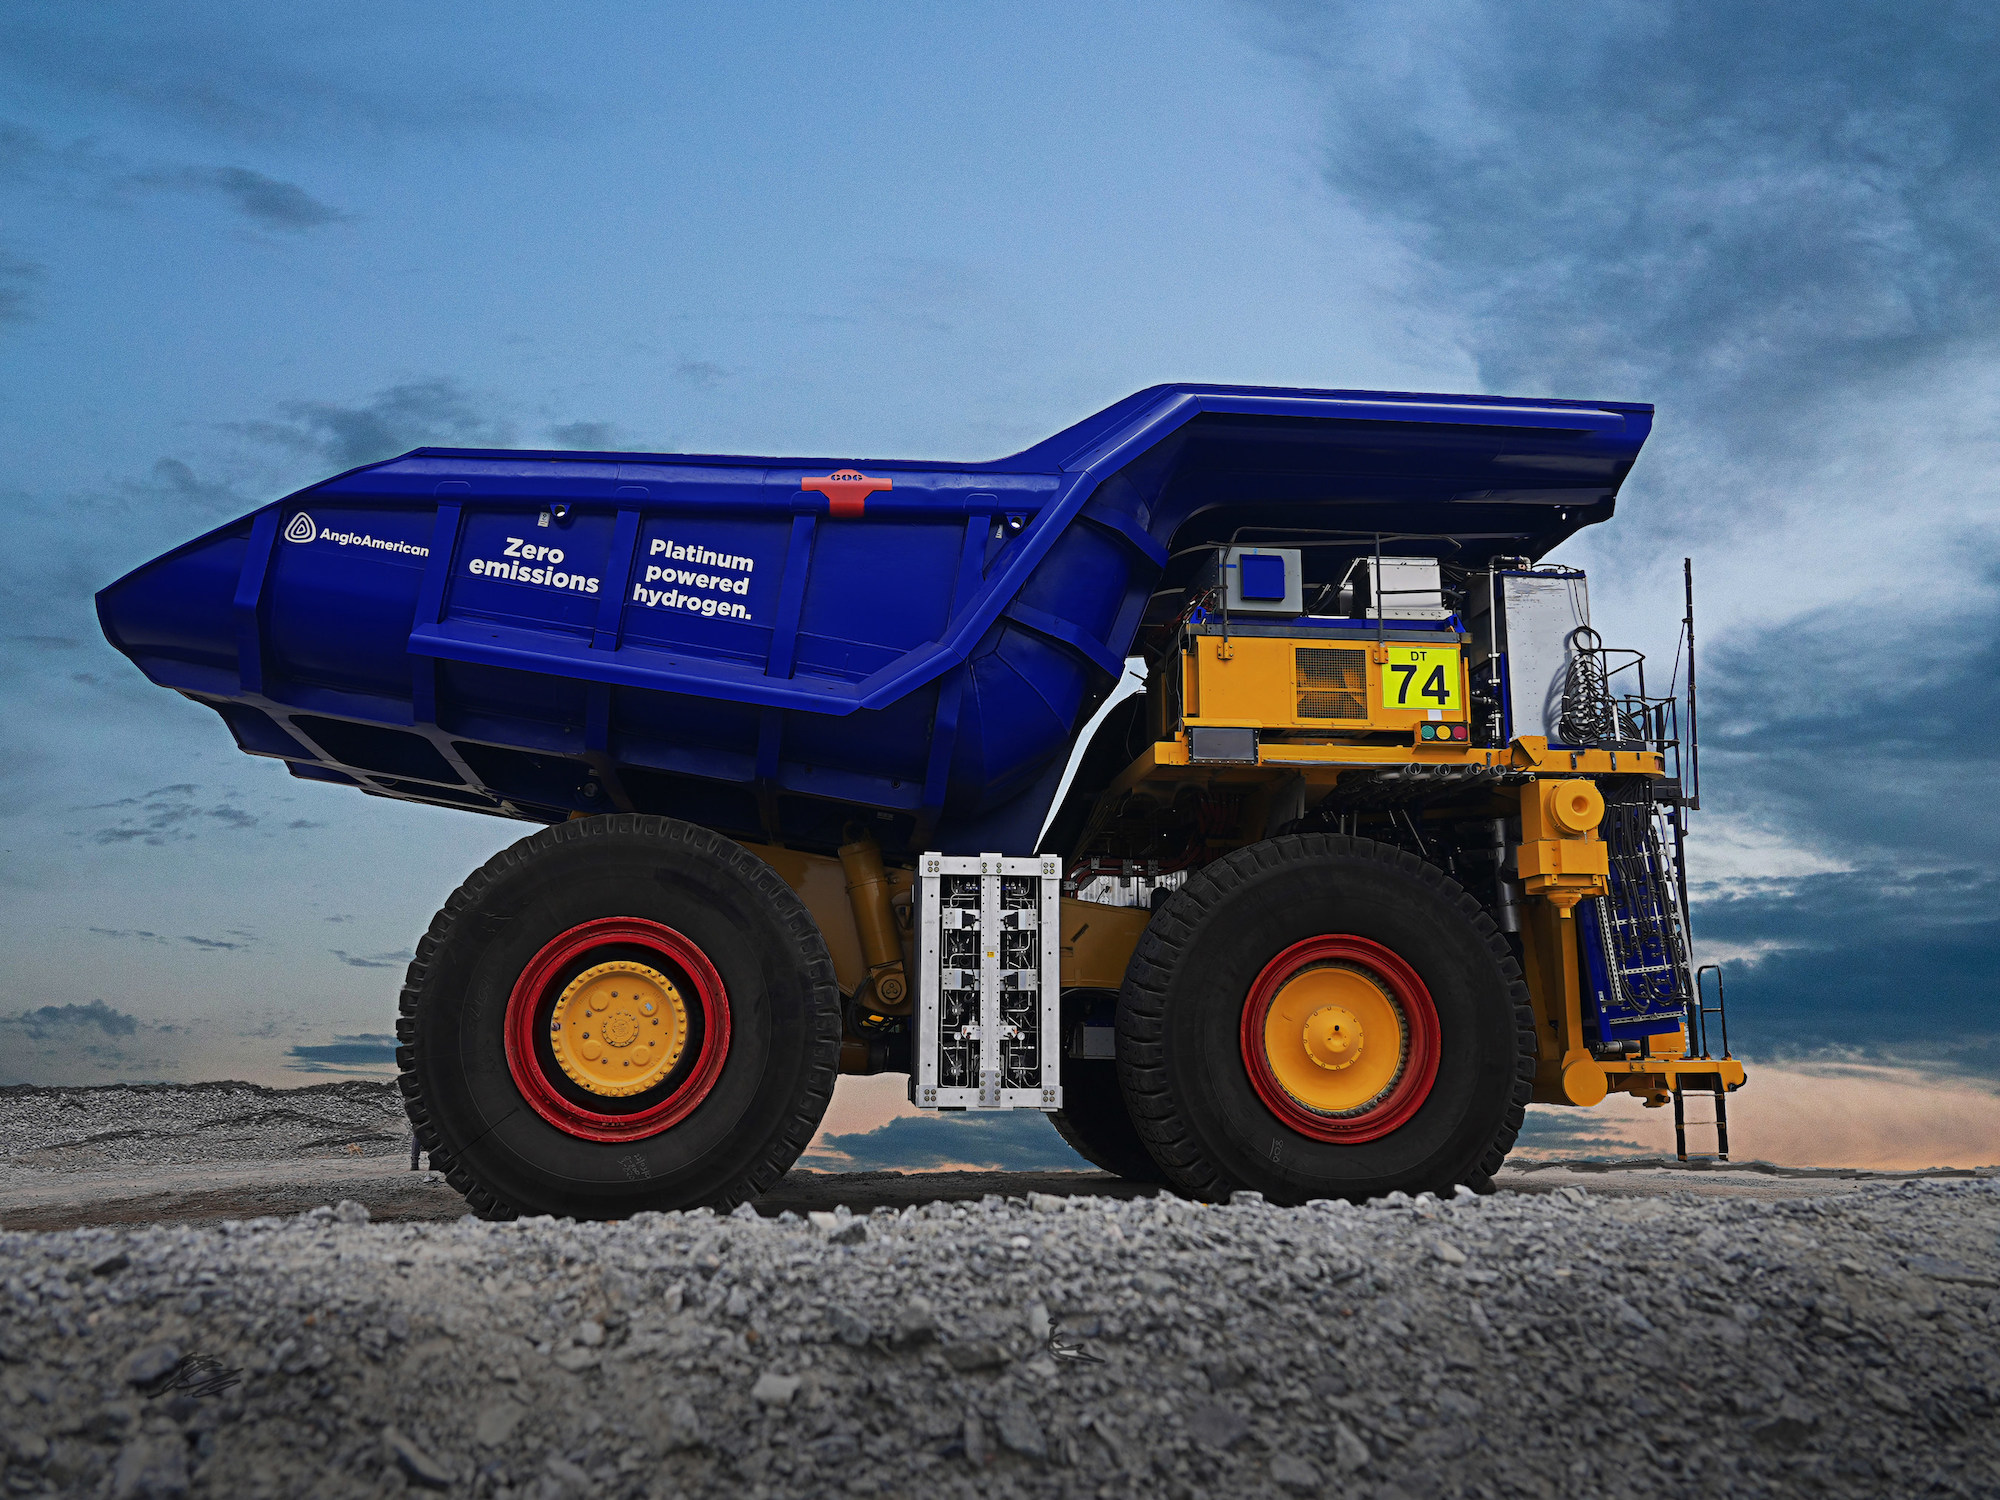 The proof-of-concept hydrogen powered ultra-class mine haul truck at Anglo American’s Mogalakwena Platinum Group Metals mine in South Africa. 